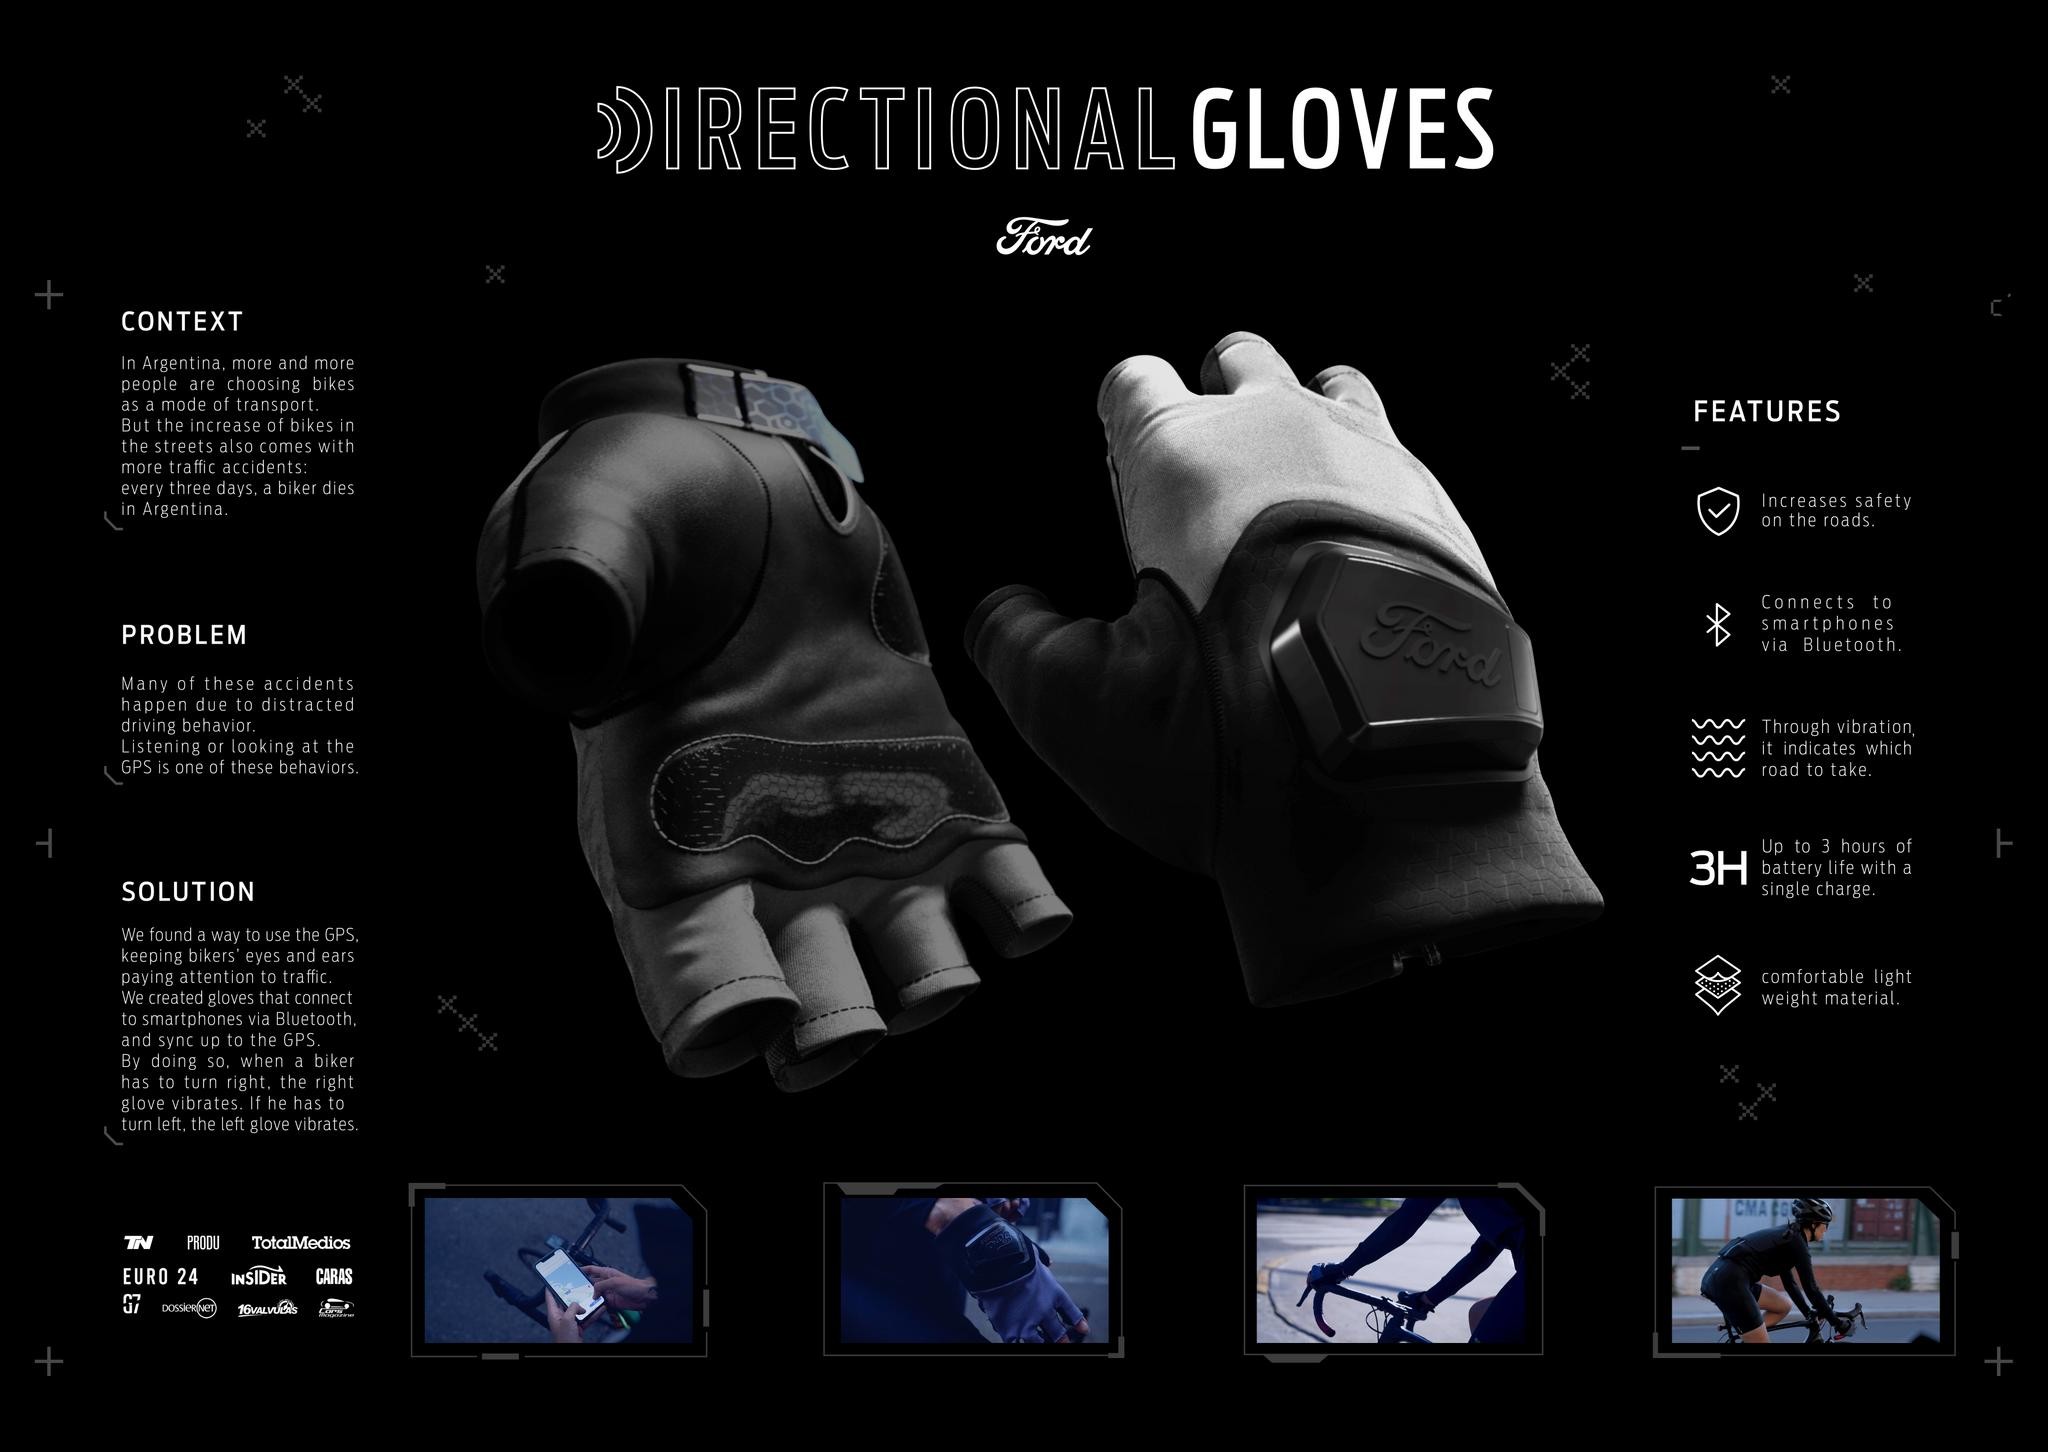 Ford - Directional Gloves 